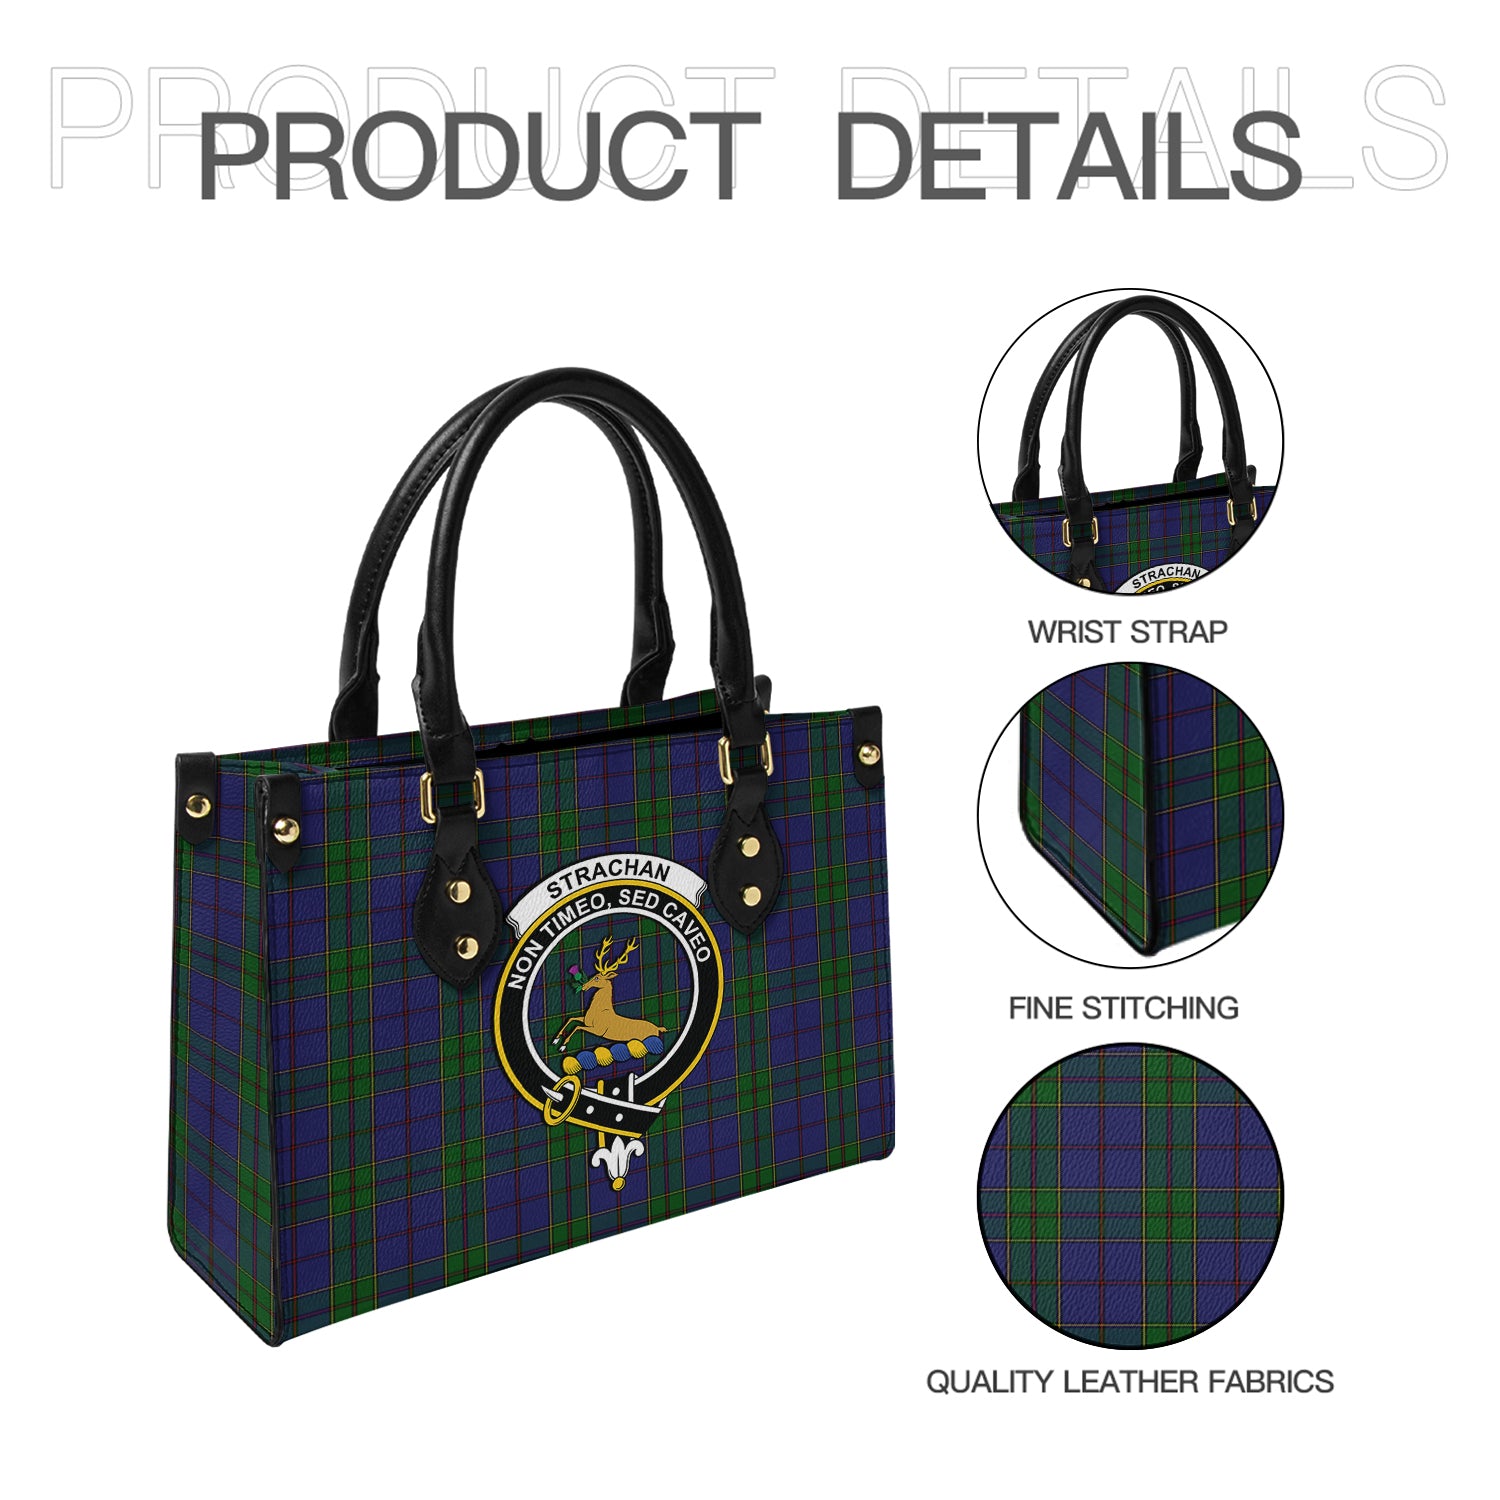 strachan-tartan-leather-bag-with-family-crest